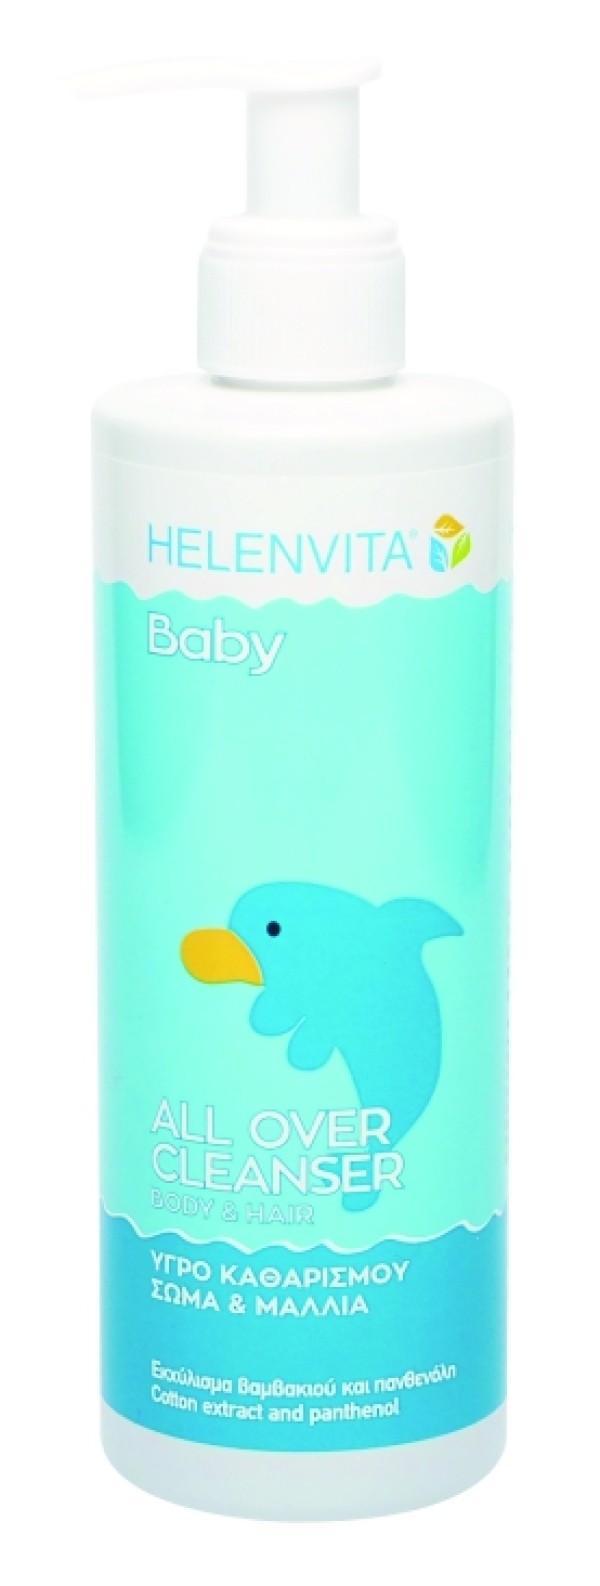 Helenvita Baby All Over Cleanser 300 ml product photo